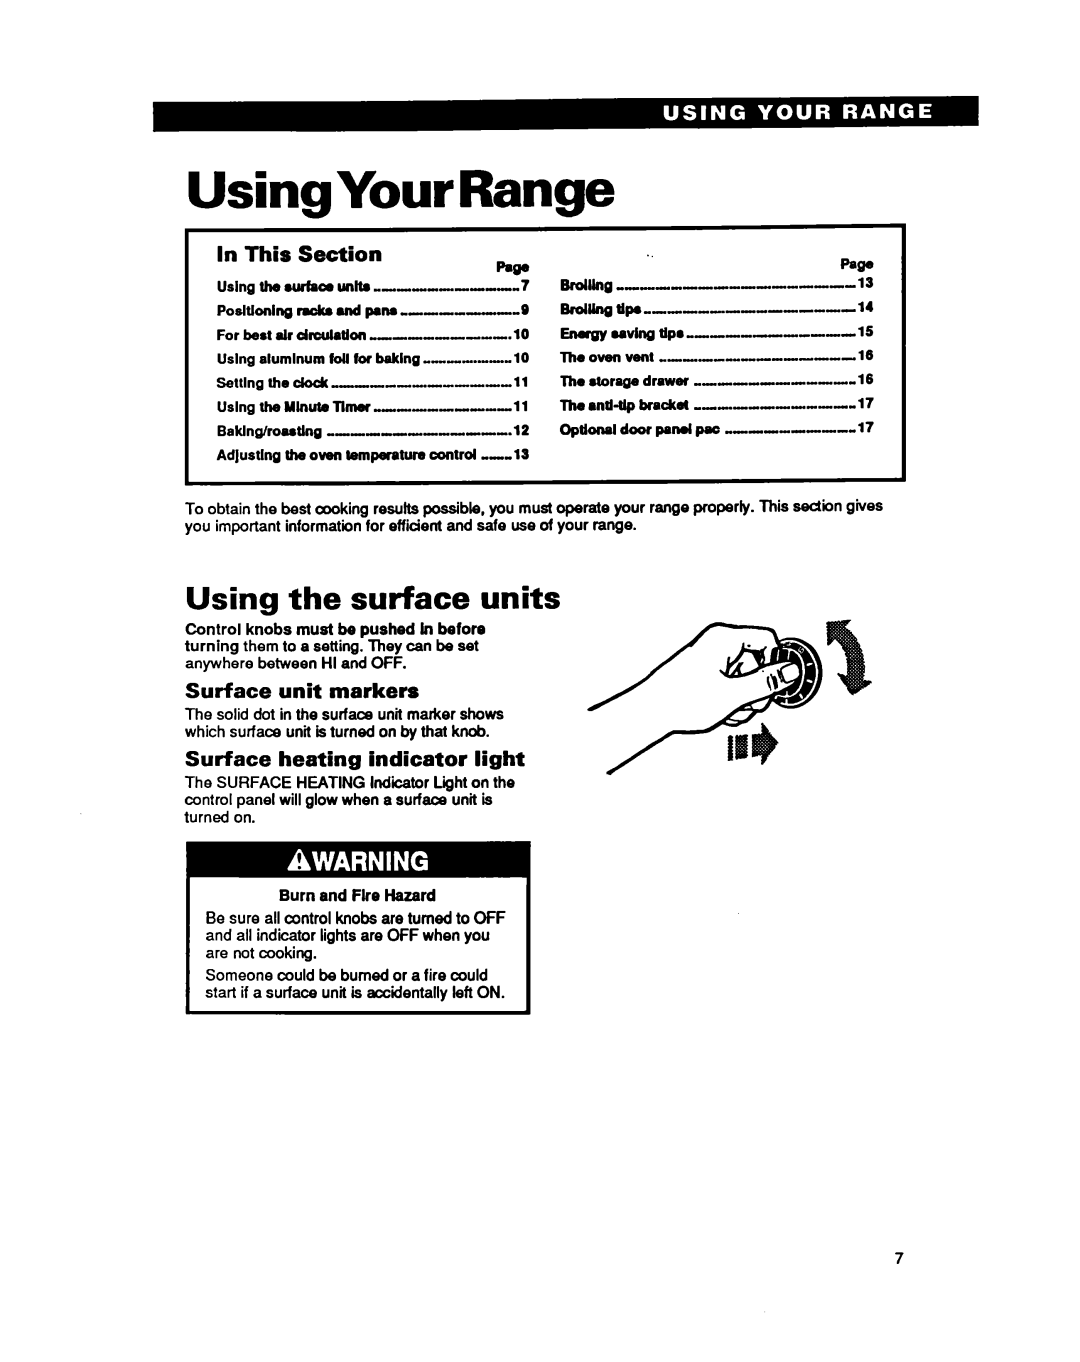 Whirlpool RF310PXY UsingYourRange, Using the surface units, This, Section, Surface unit markers, Burn and Fire Hazard 